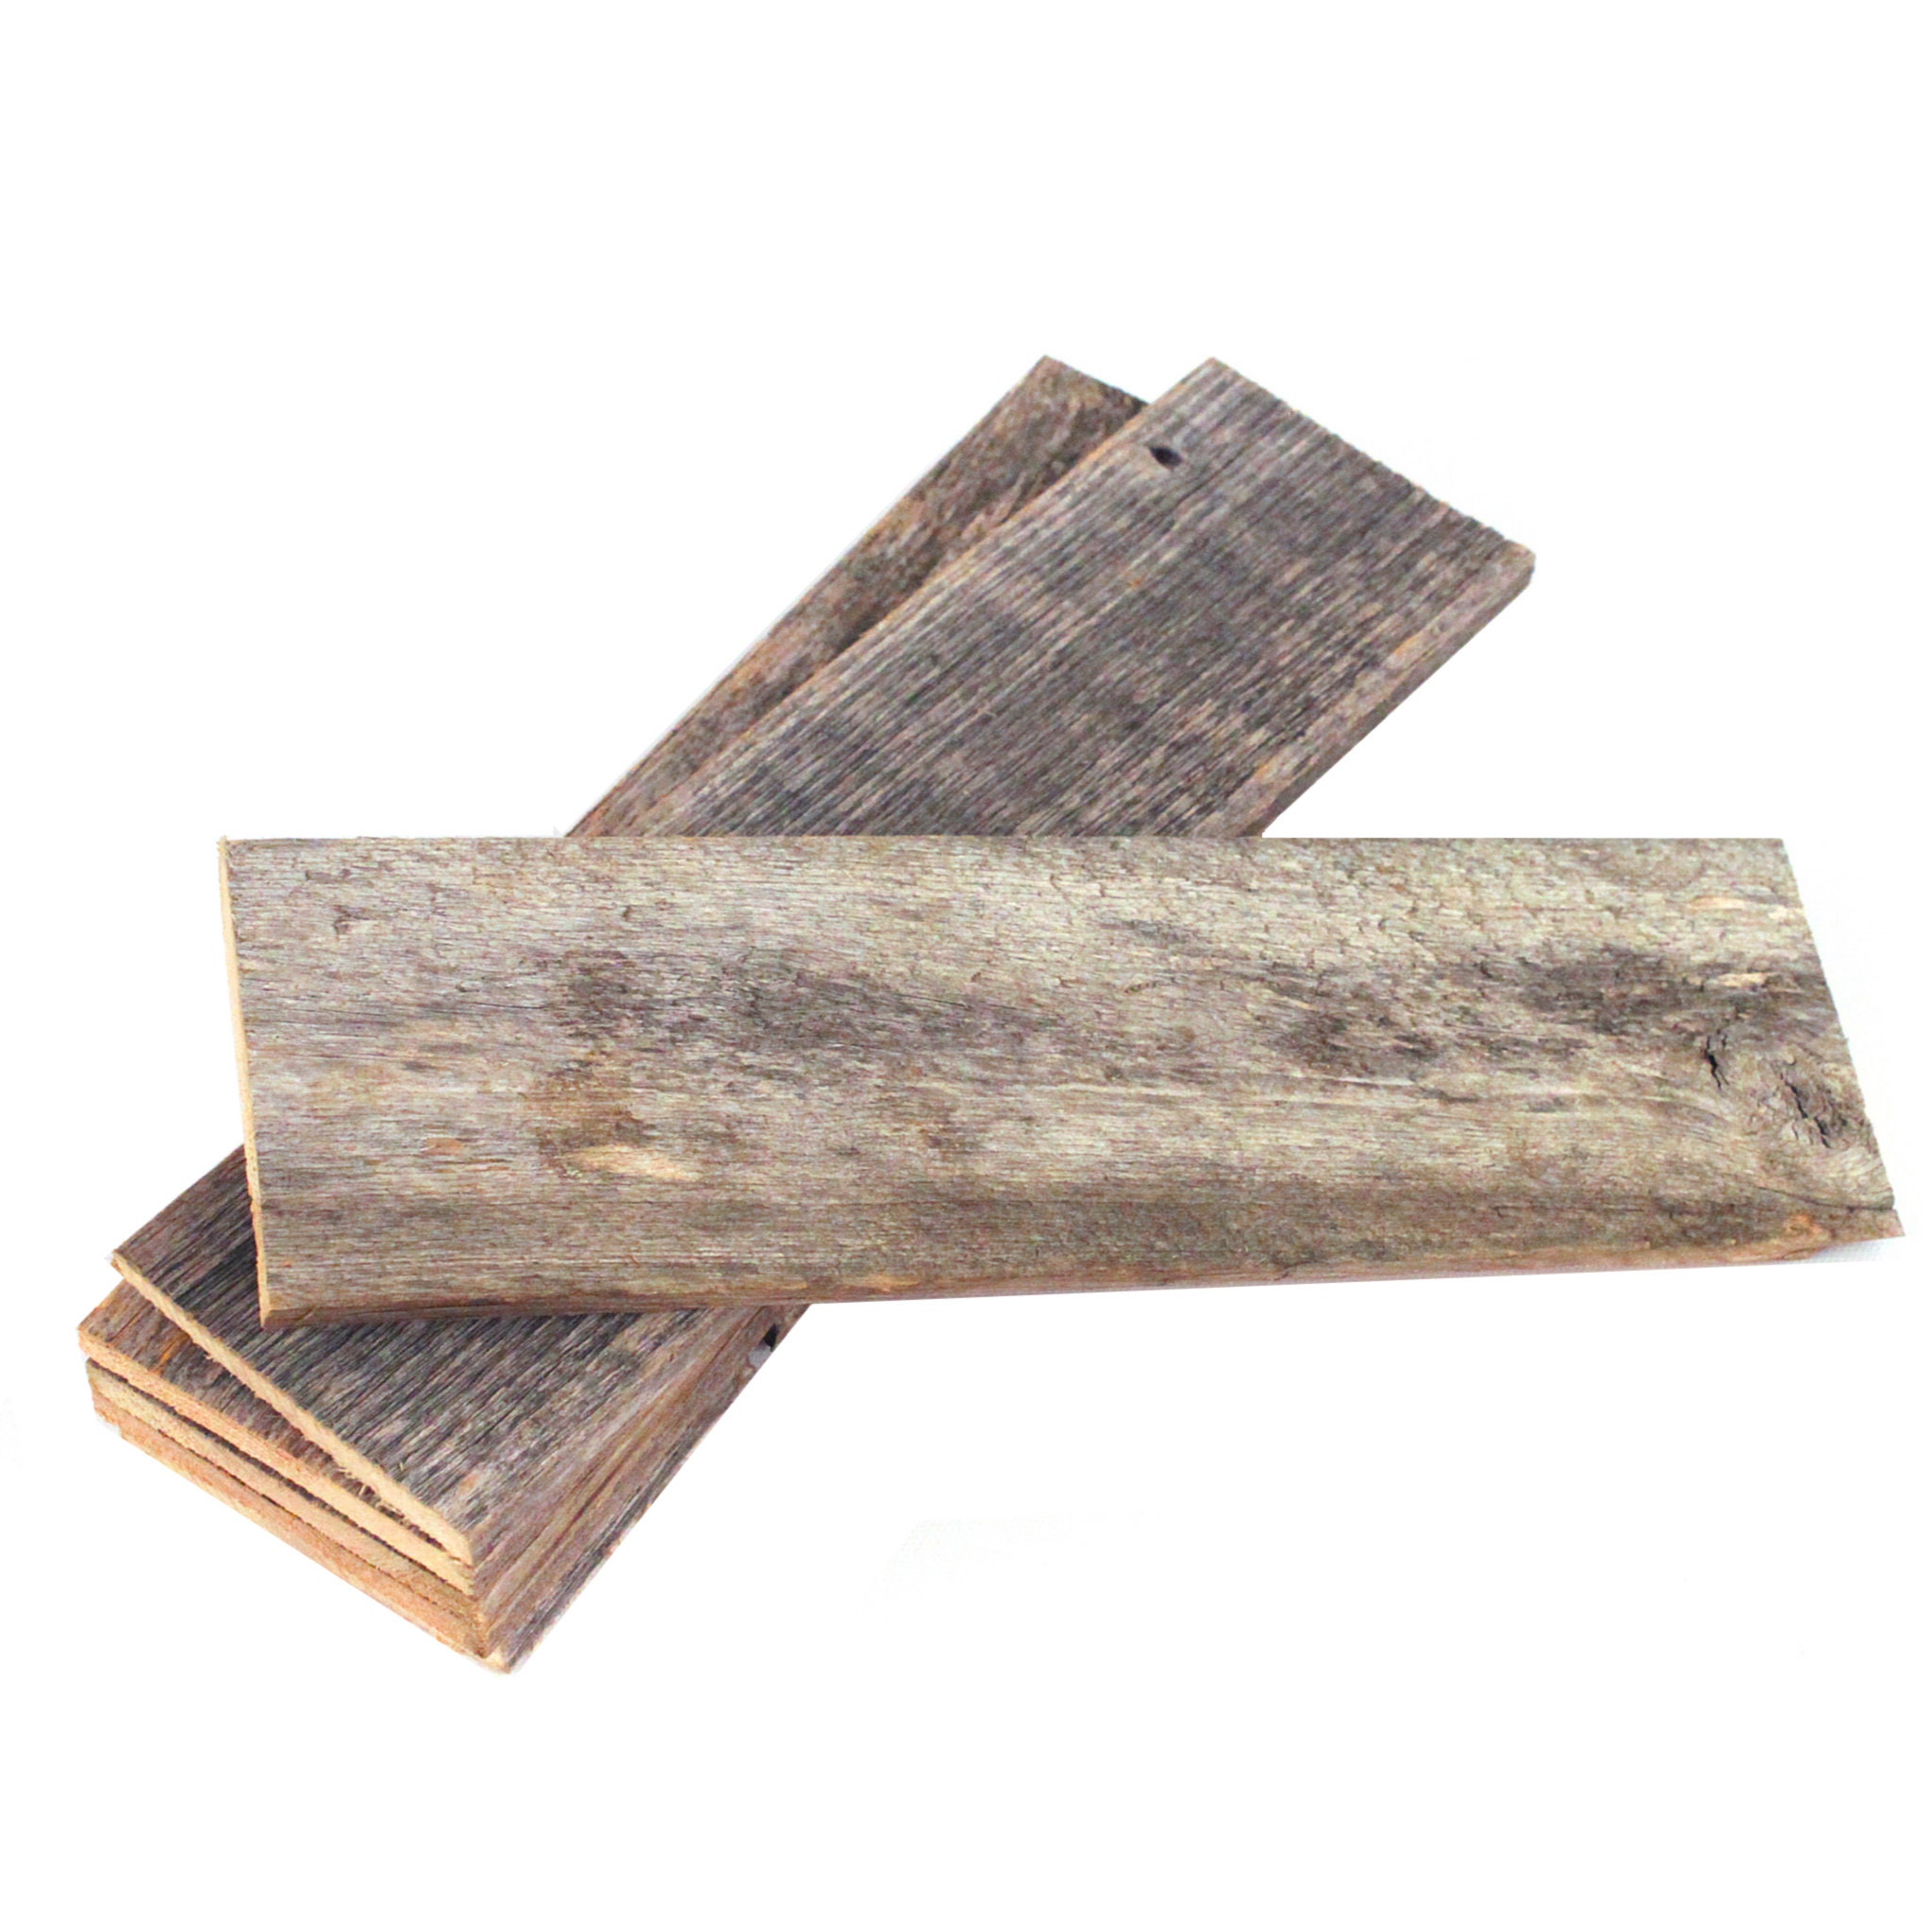 Reclaimed Split Wood Plank Bundle for DIY Projects Craft Wood Pack